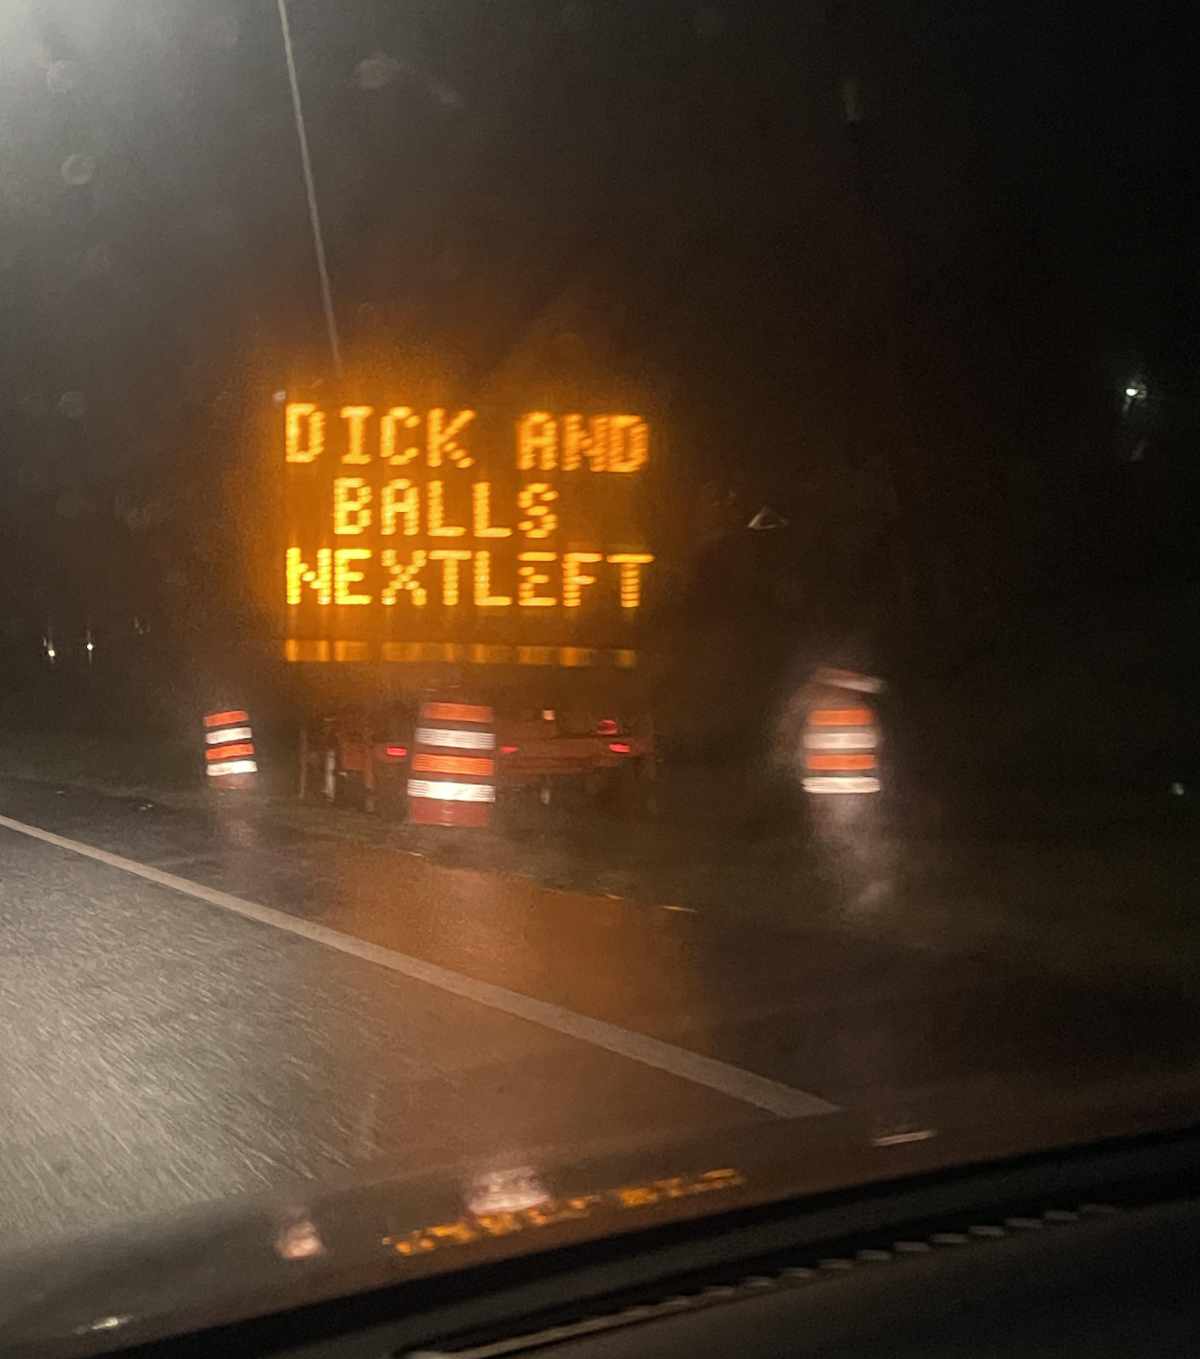 Driving to work at 3am and saw this!